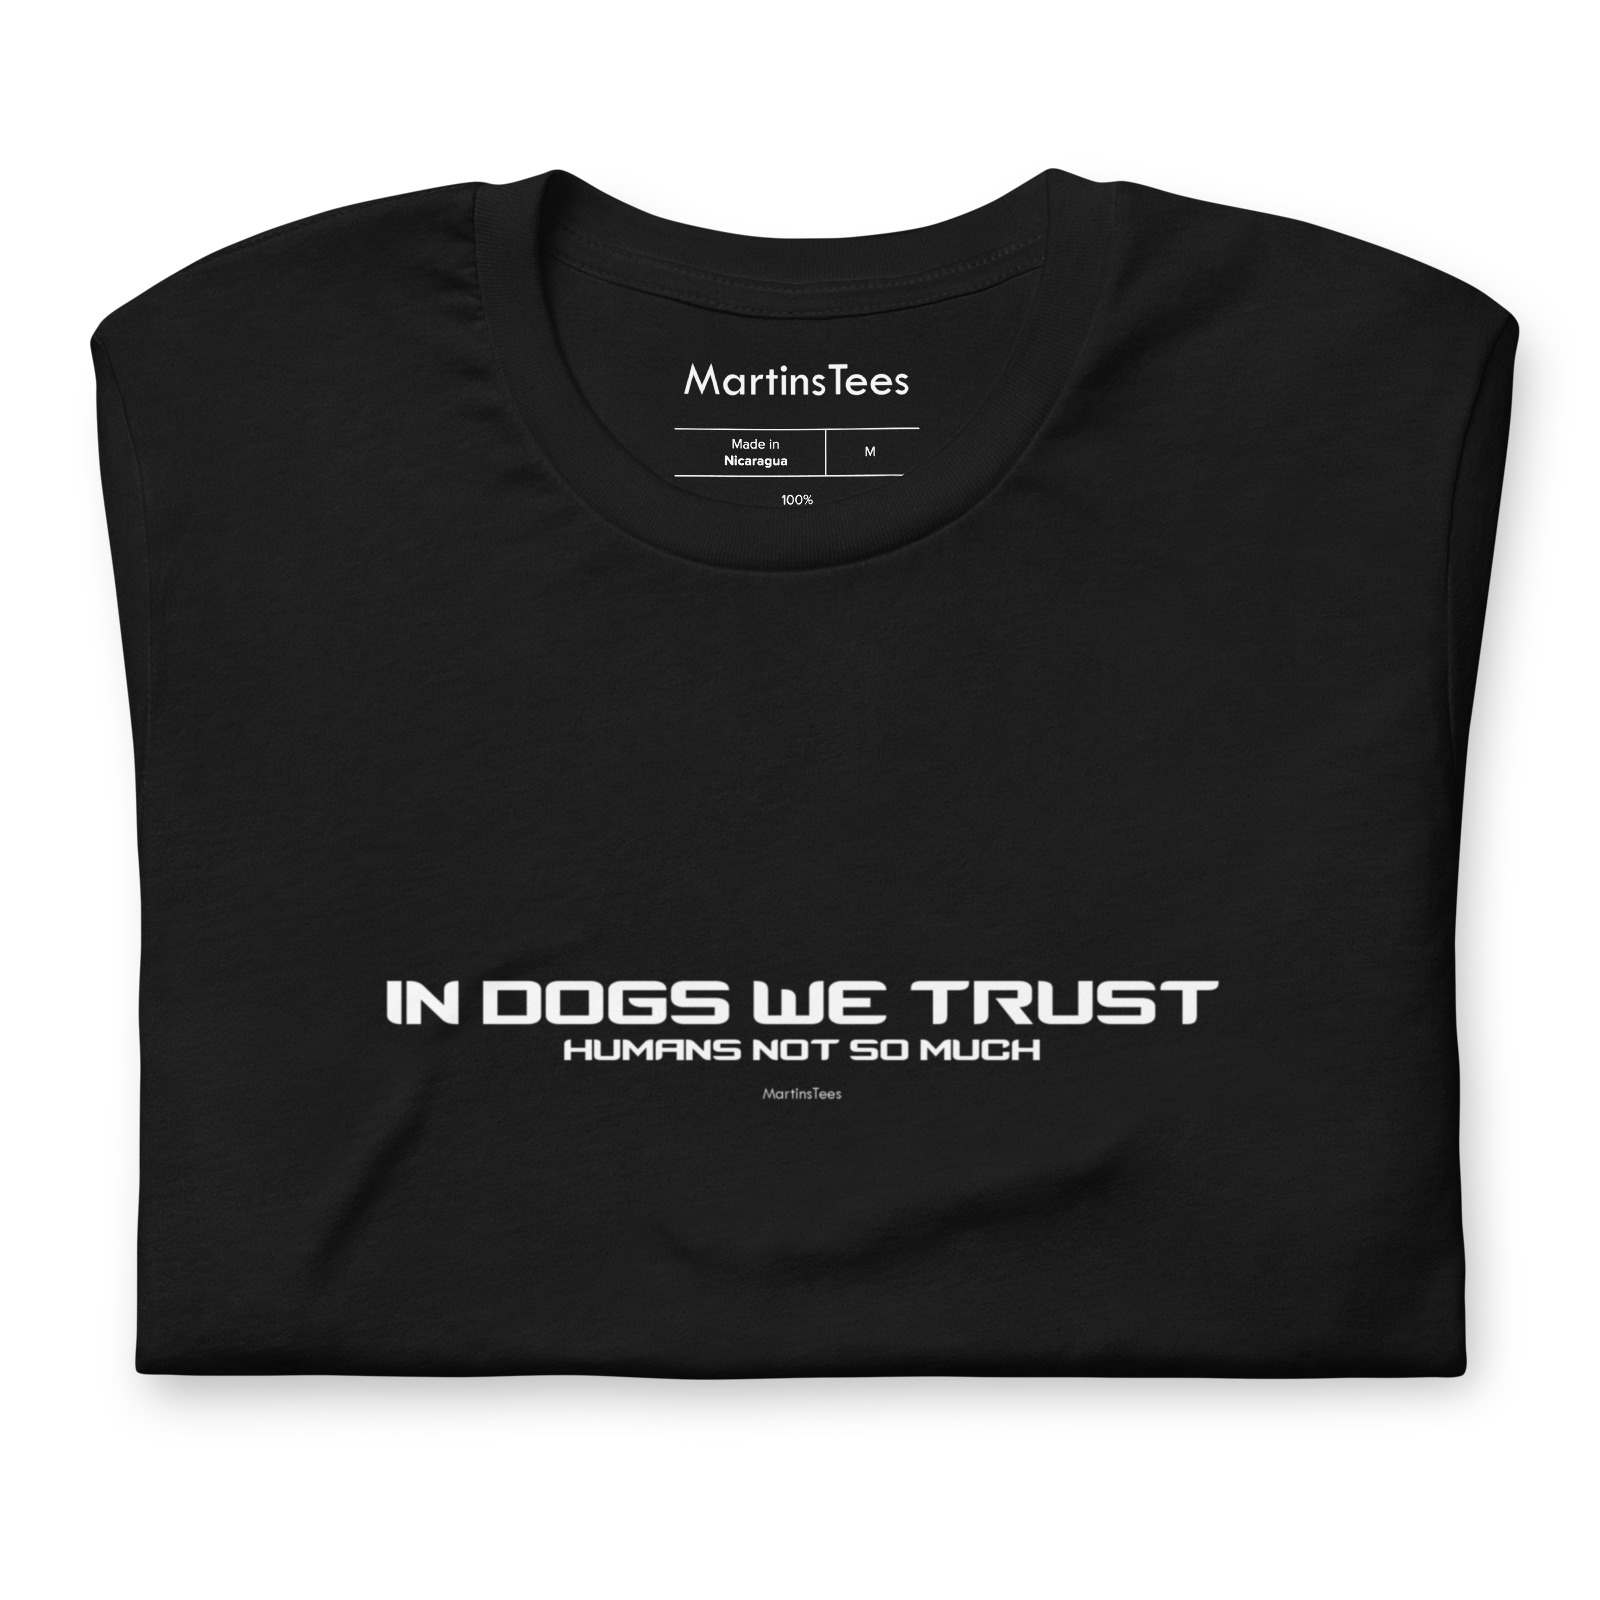 T-shirt: IN DOGS WE TRUST - HUMANS NOT SO MUCH